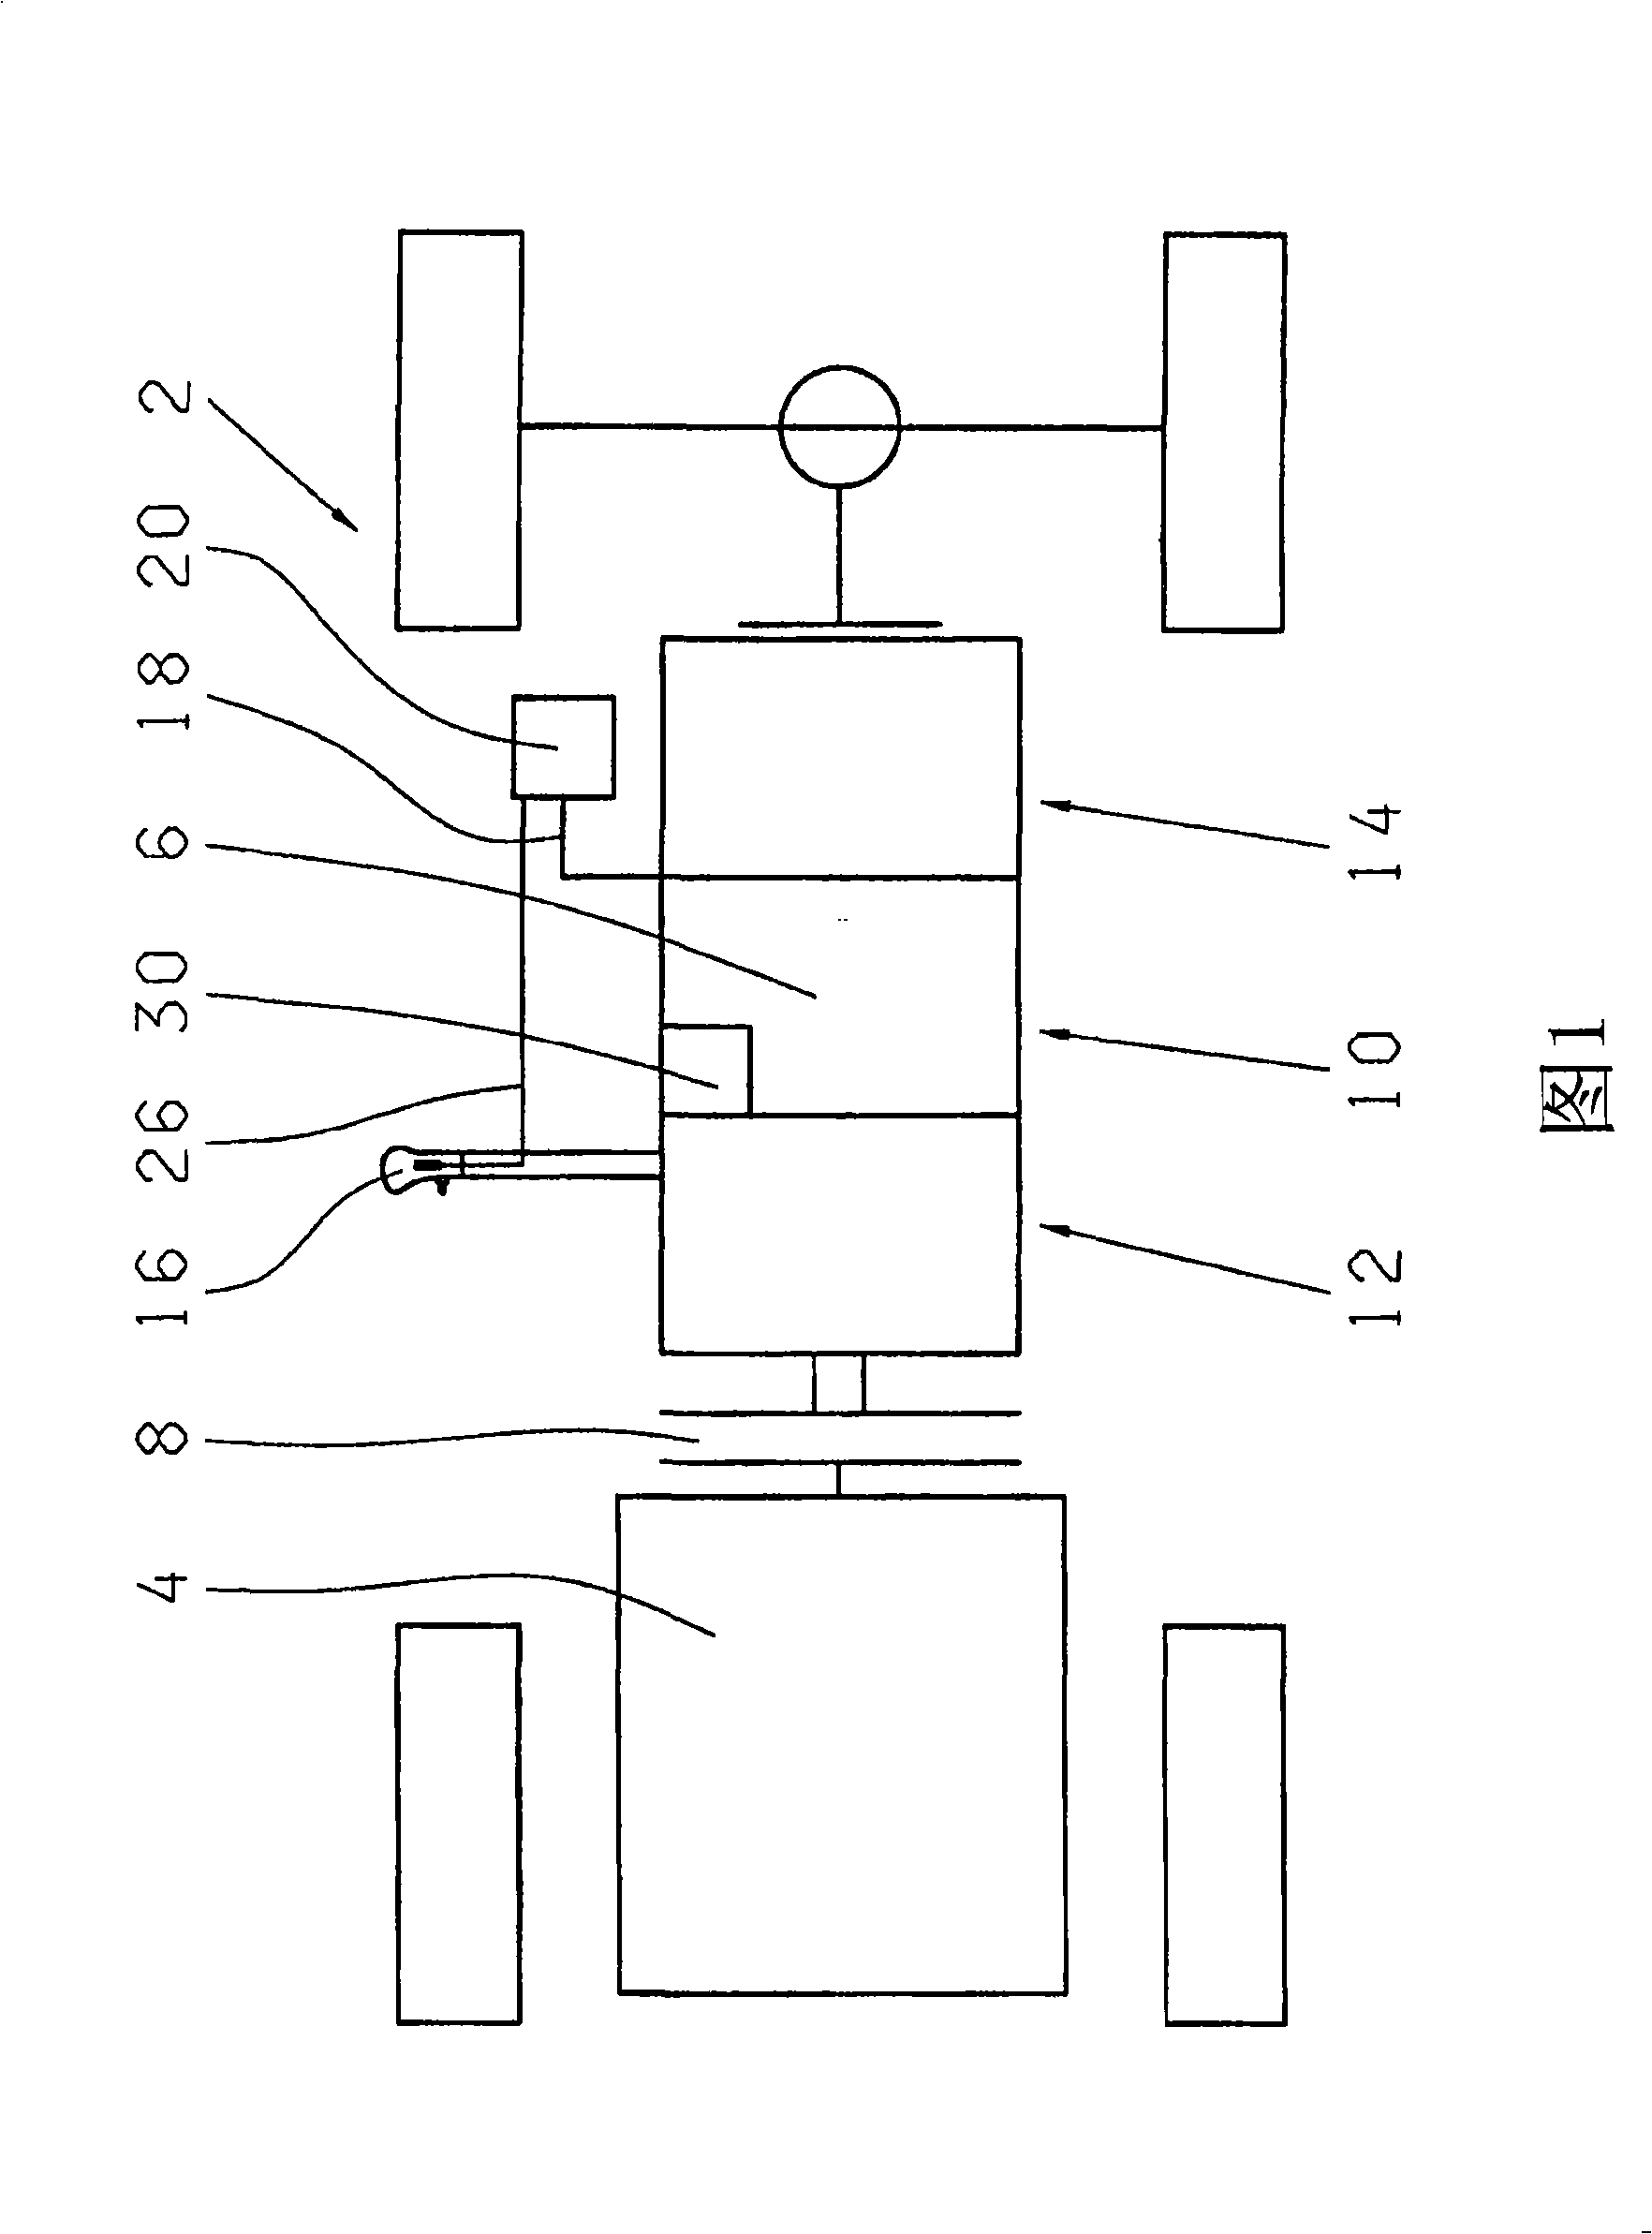 Transmission shift device with variable gate blocking force